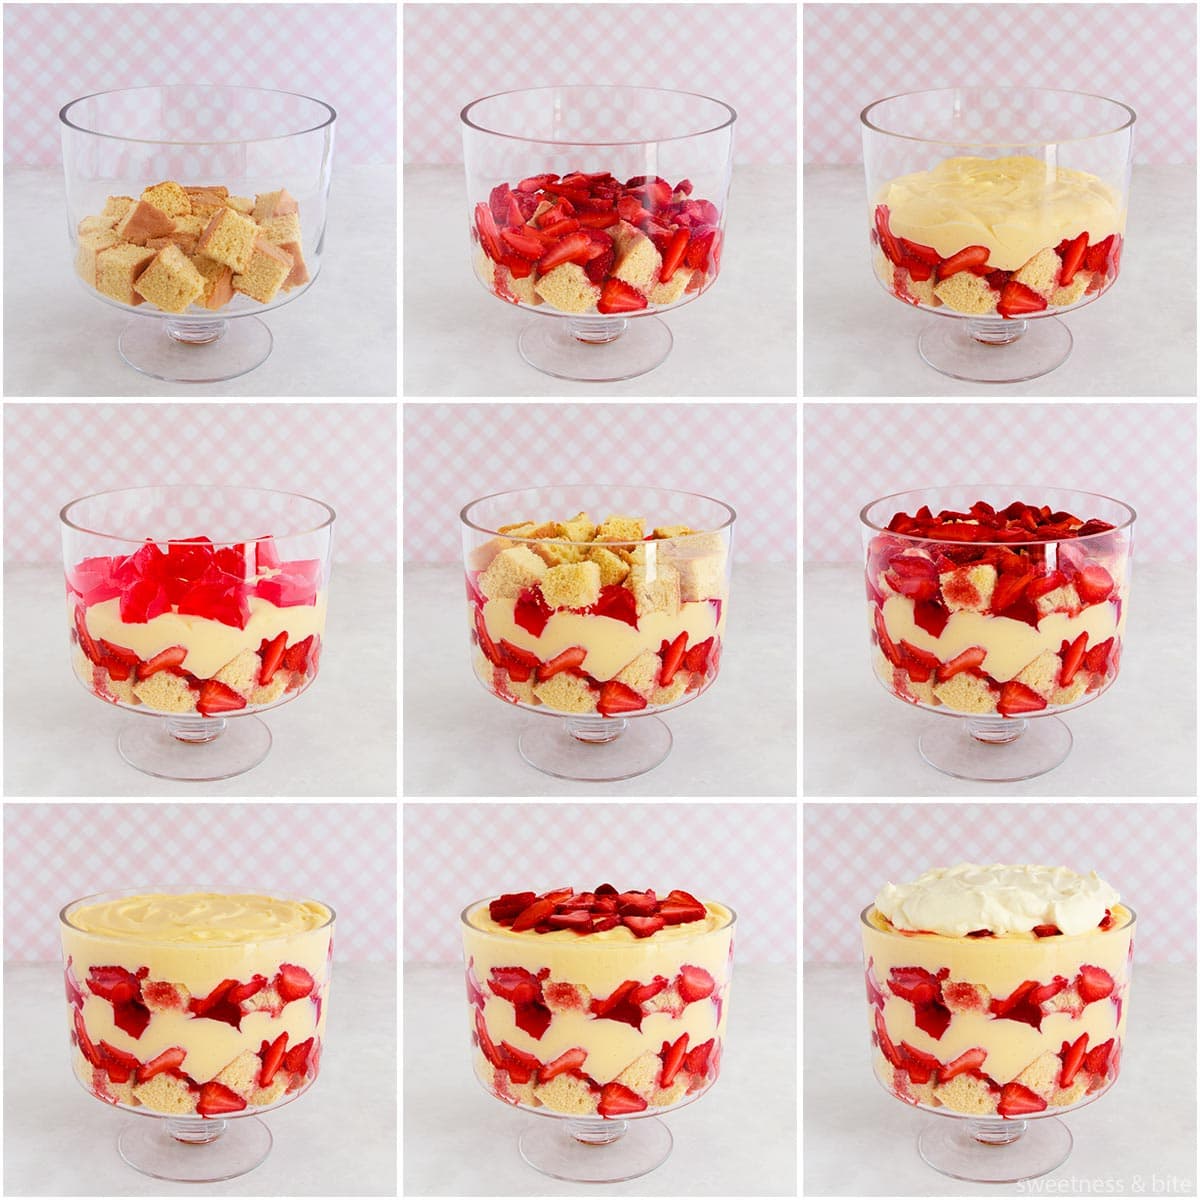 Collage of nine images showing the gluten free trifle layers being assembled in a footed trifle bowl.